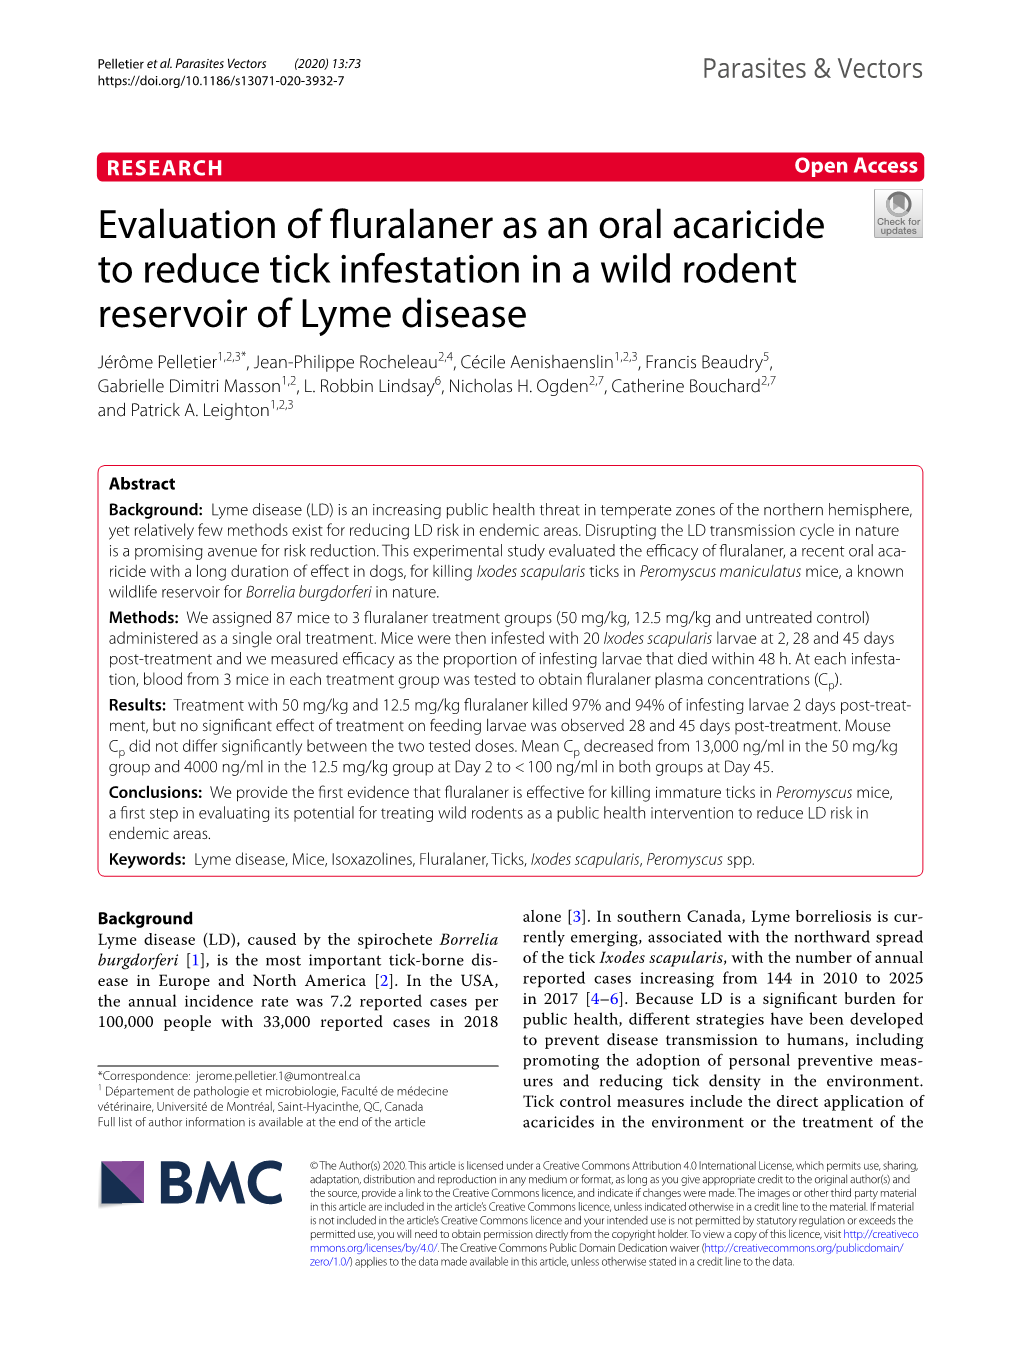 Evaluation of Fluralaner As an Oral Acaricide to Reduce Tick Infestation